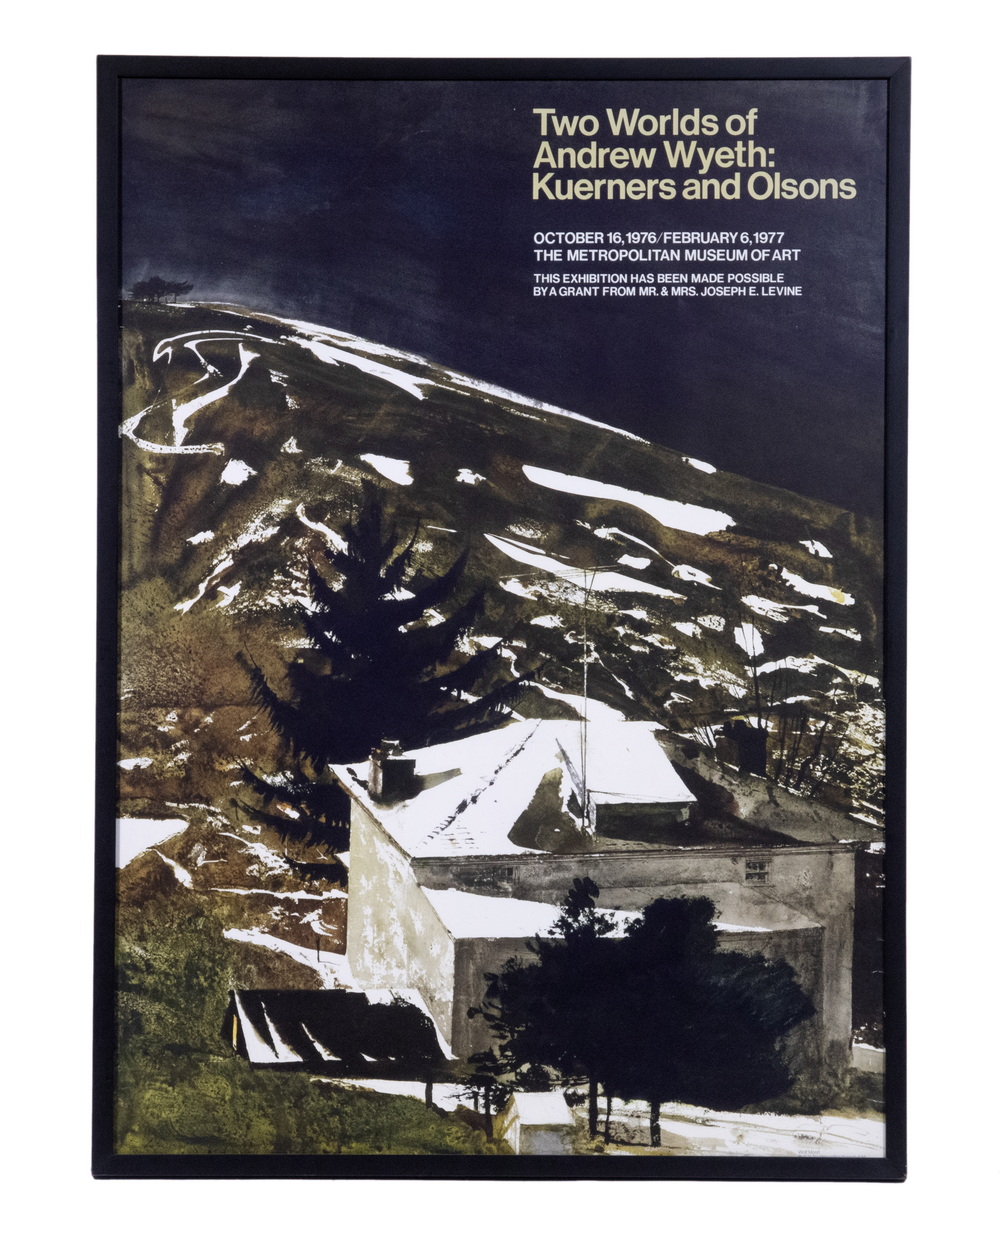 ANDREW WYETH EXHIBITION POSTER 3b6540